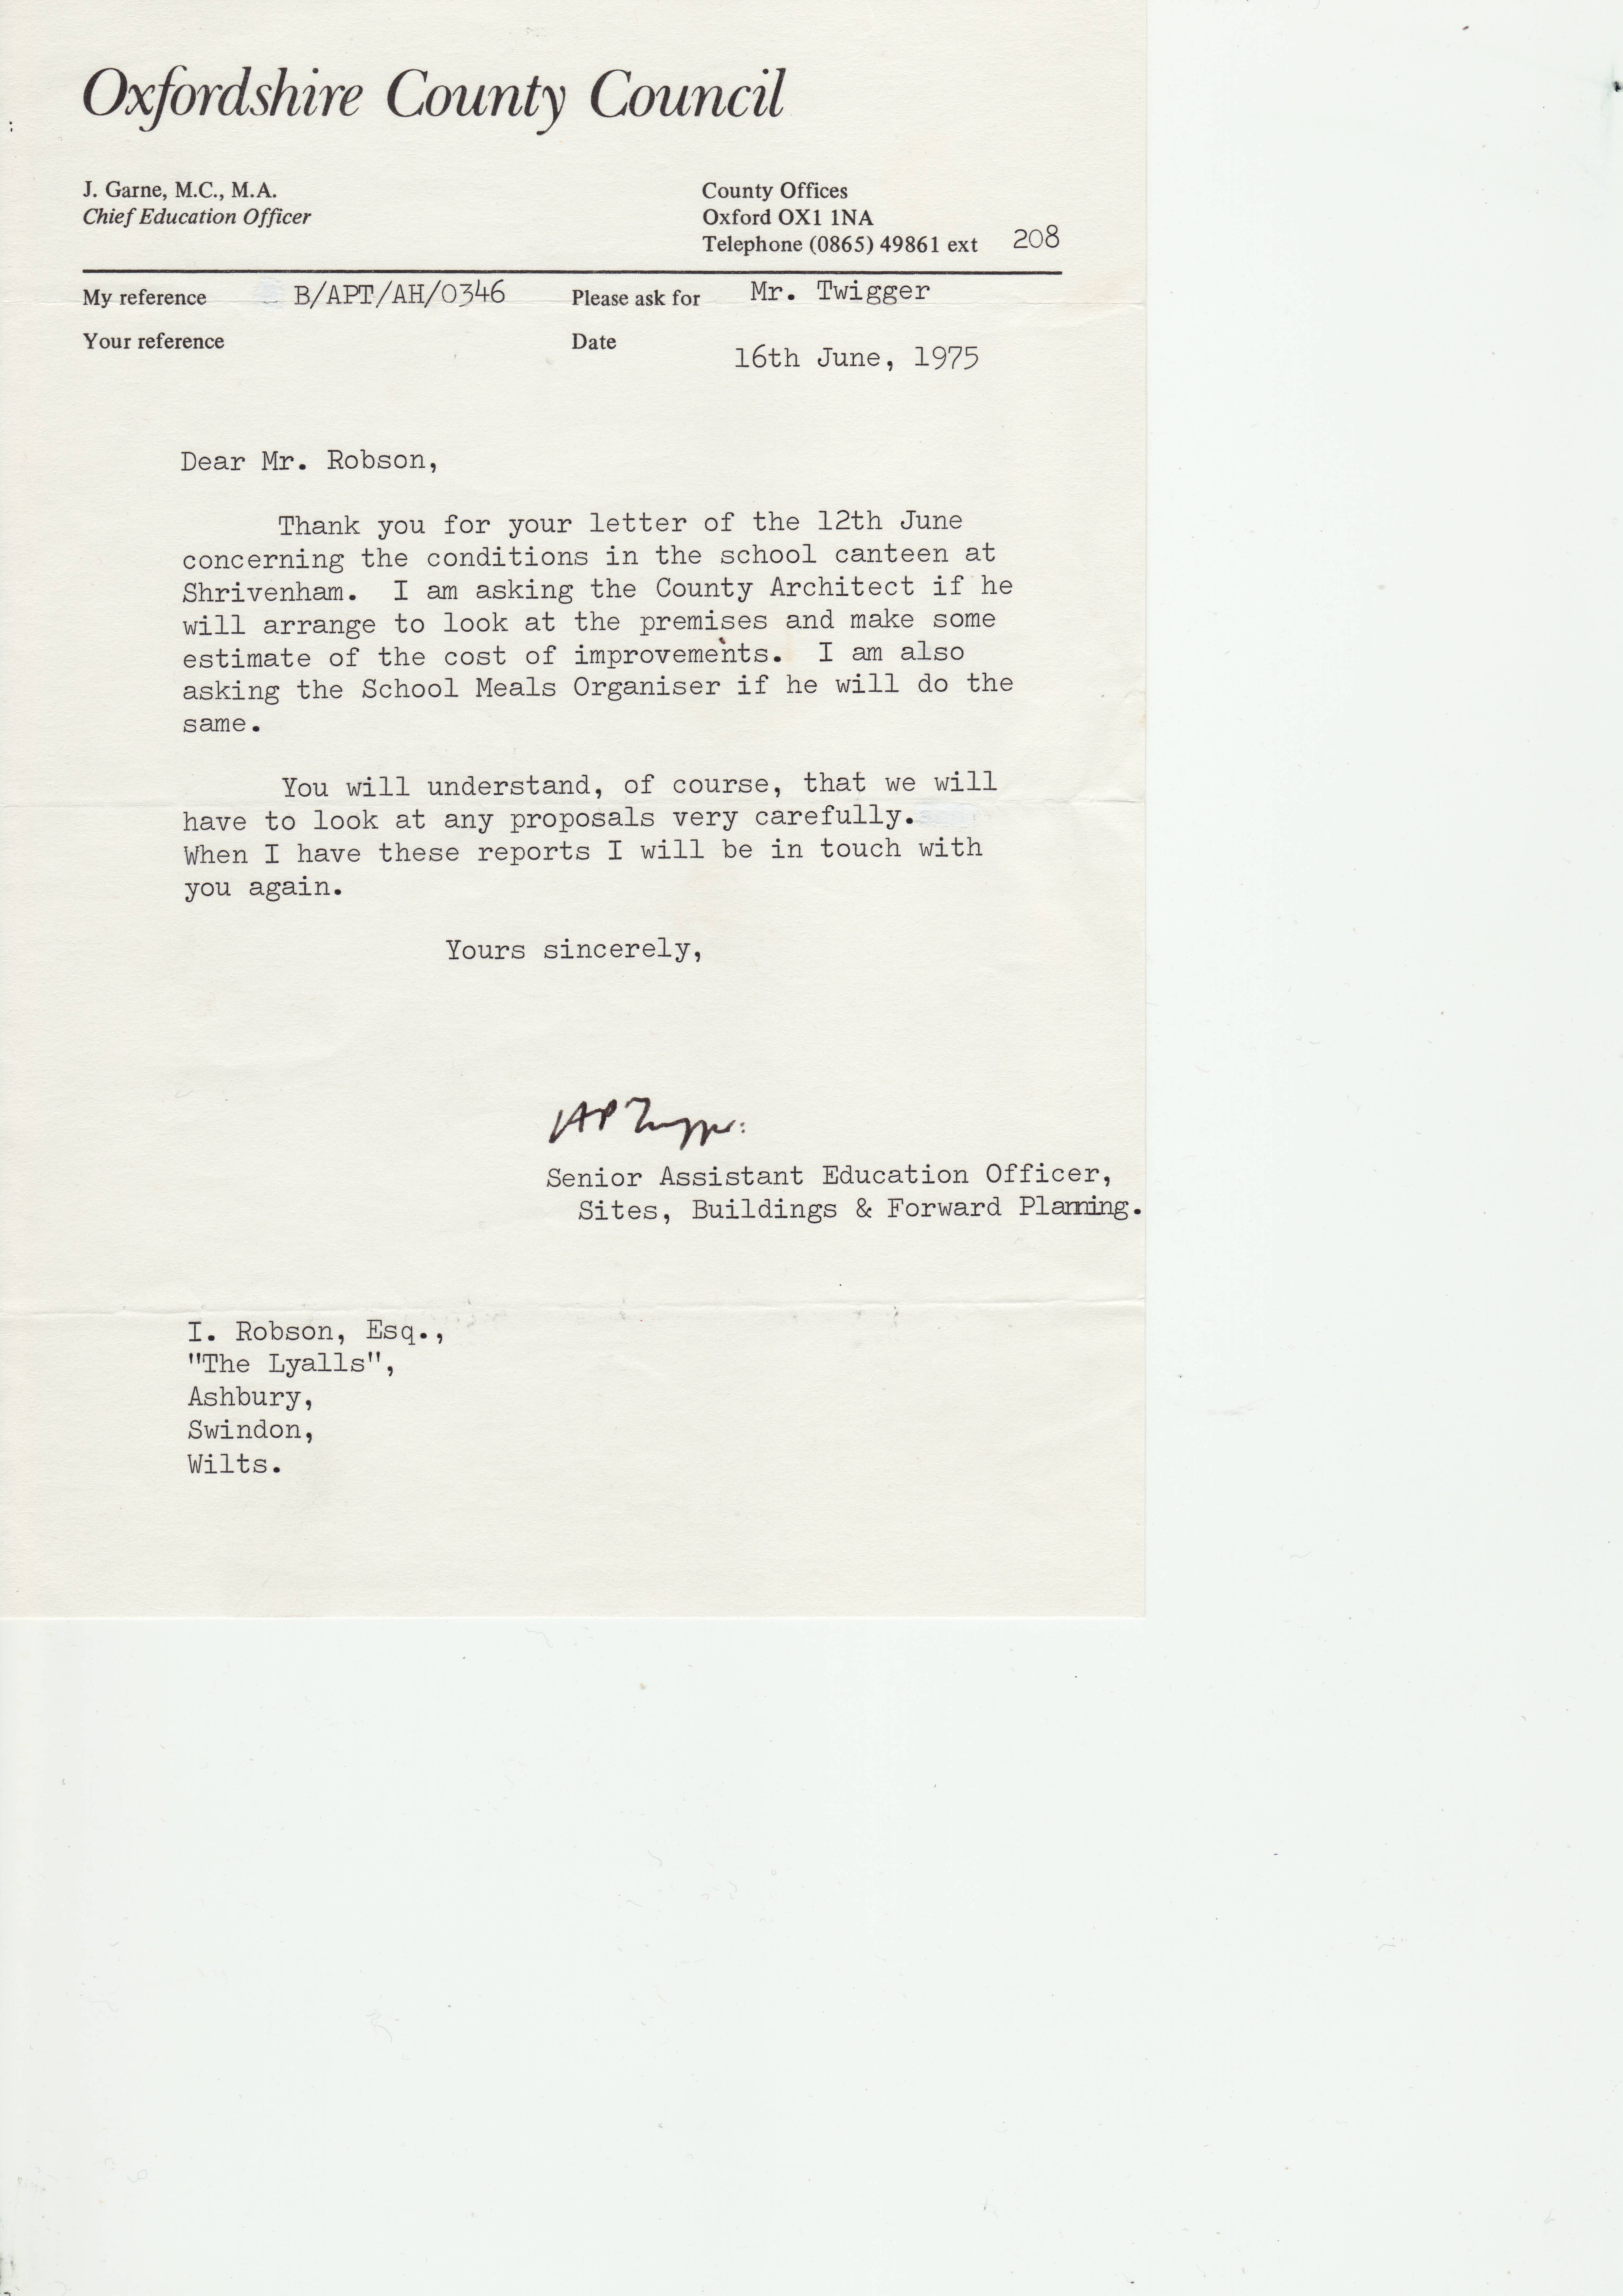 A typical letter of the file